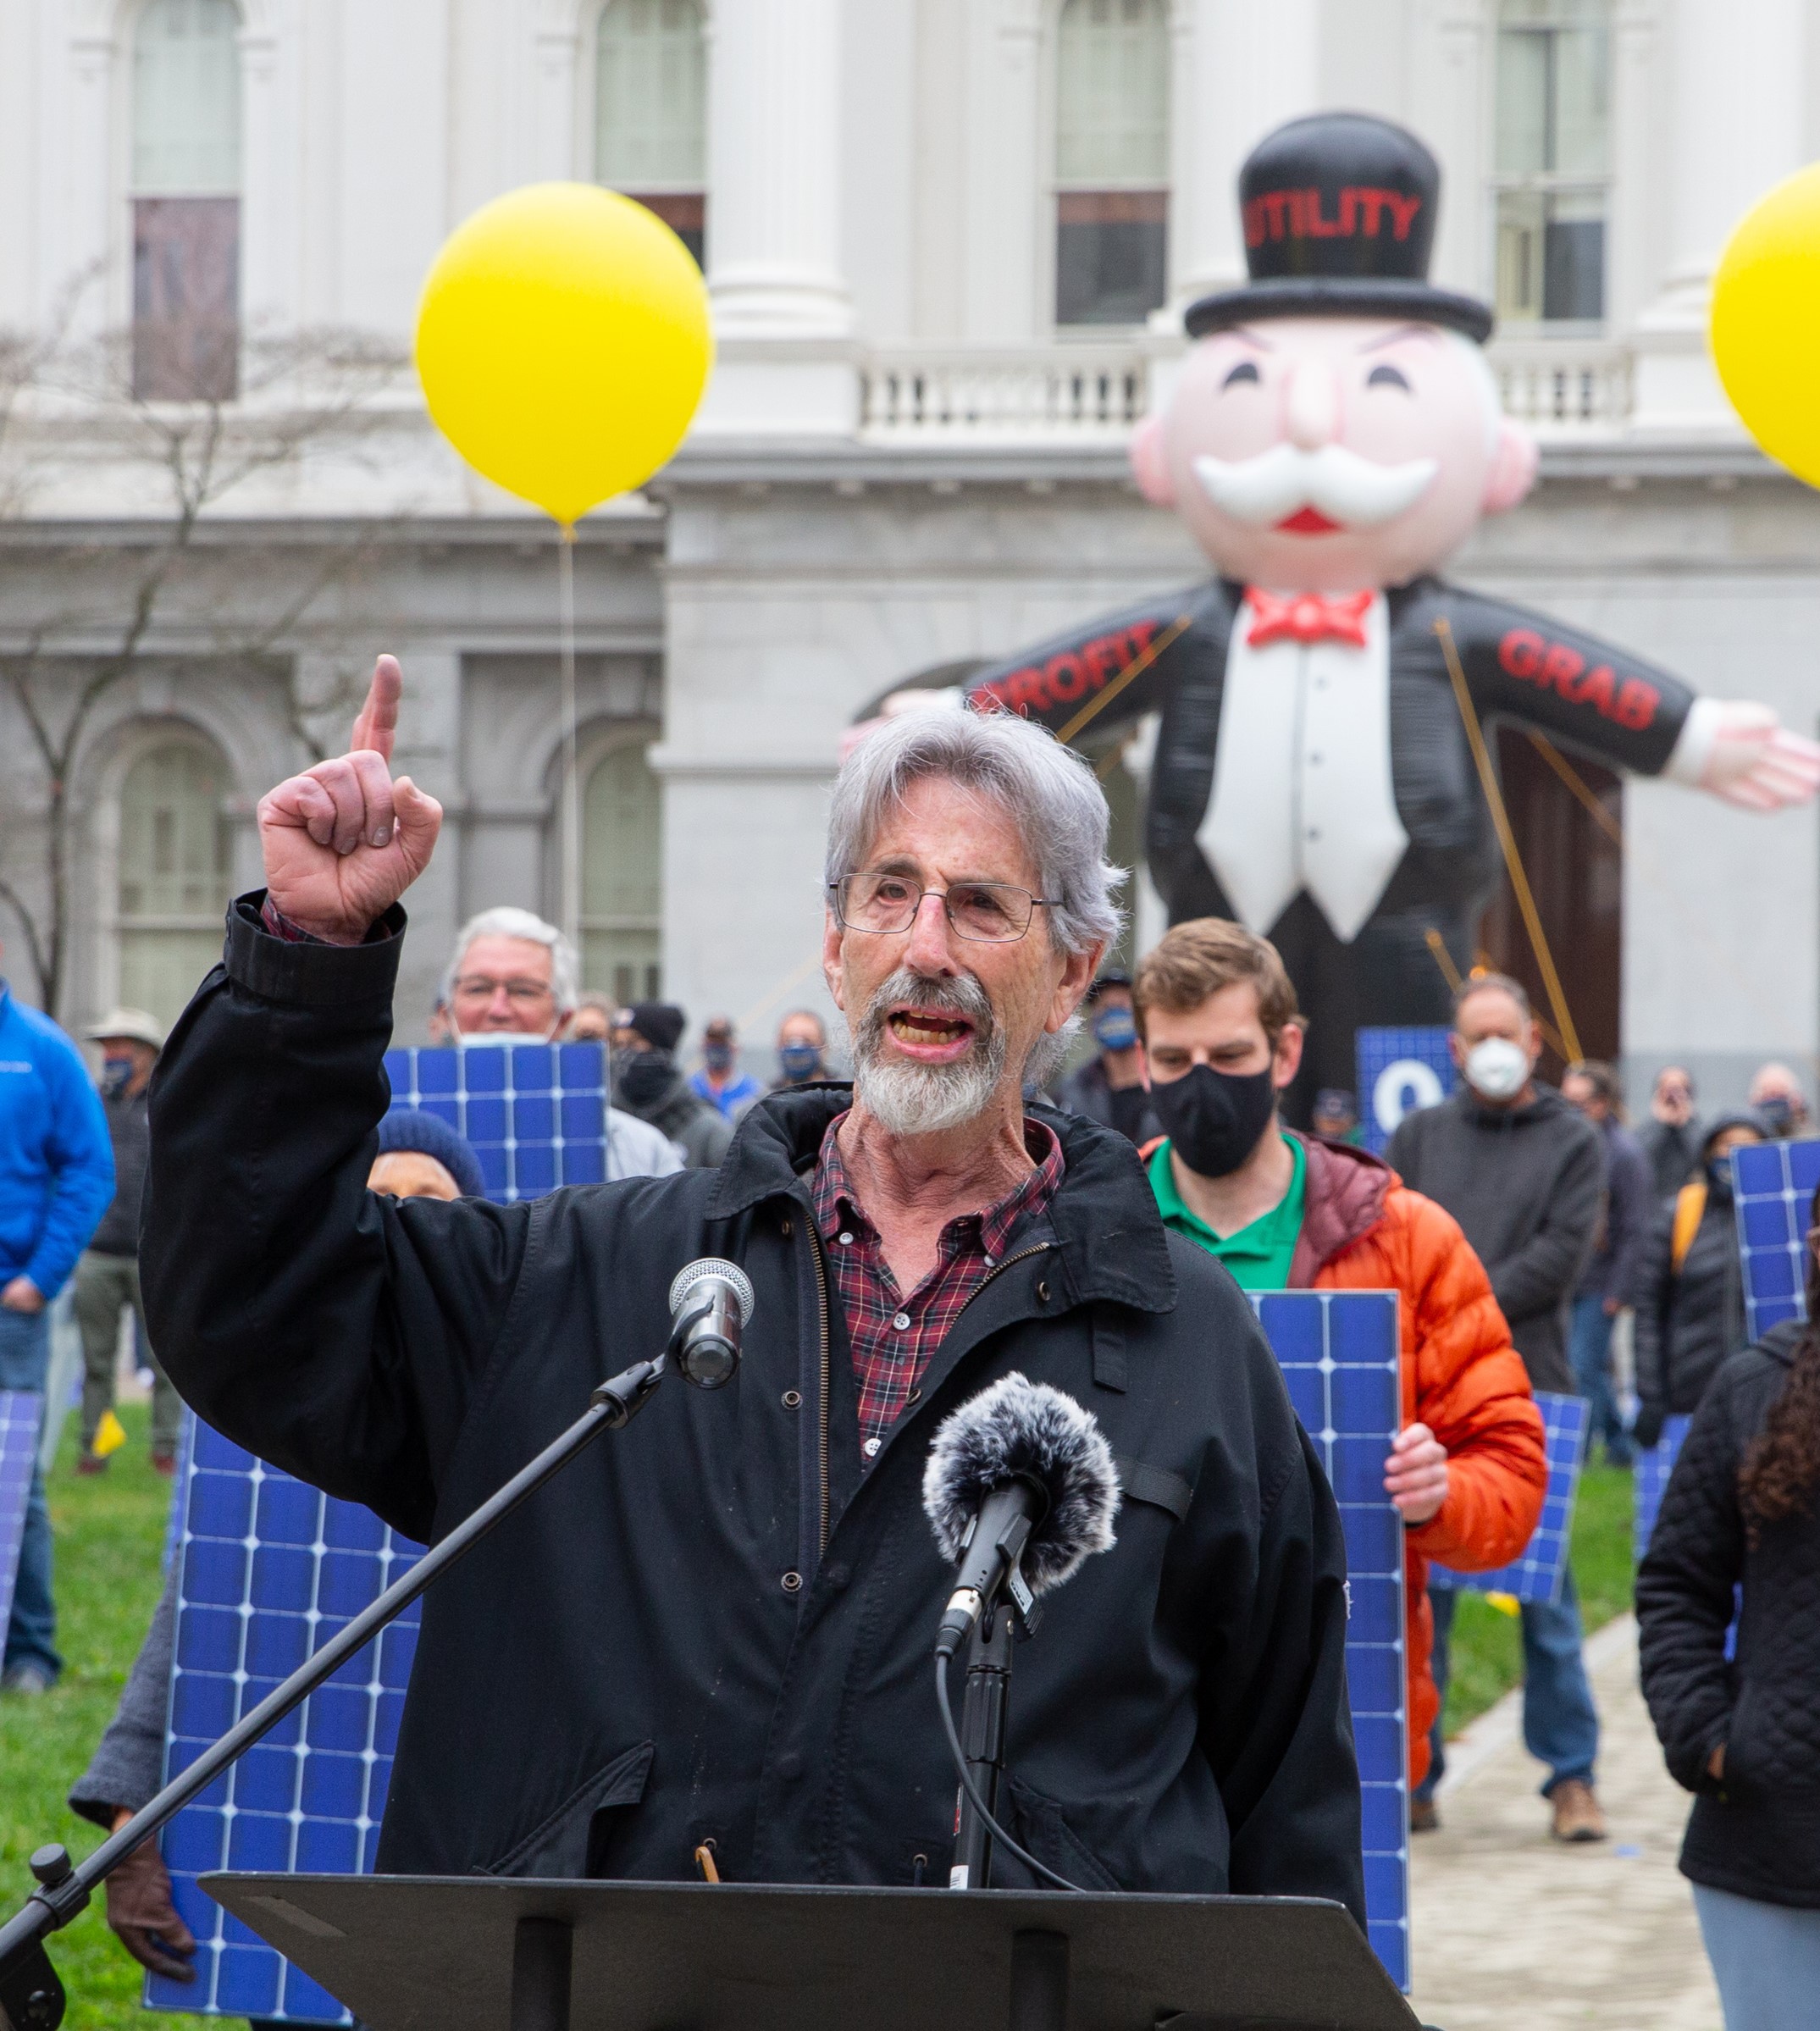 Al Weinrub, Coordinator of the Local Clean Energy Alliance, speaking out for our communities at the State Capitol, as petitions in support of rooftop solar were delivered to Governor Newsom on December 8, 2021.